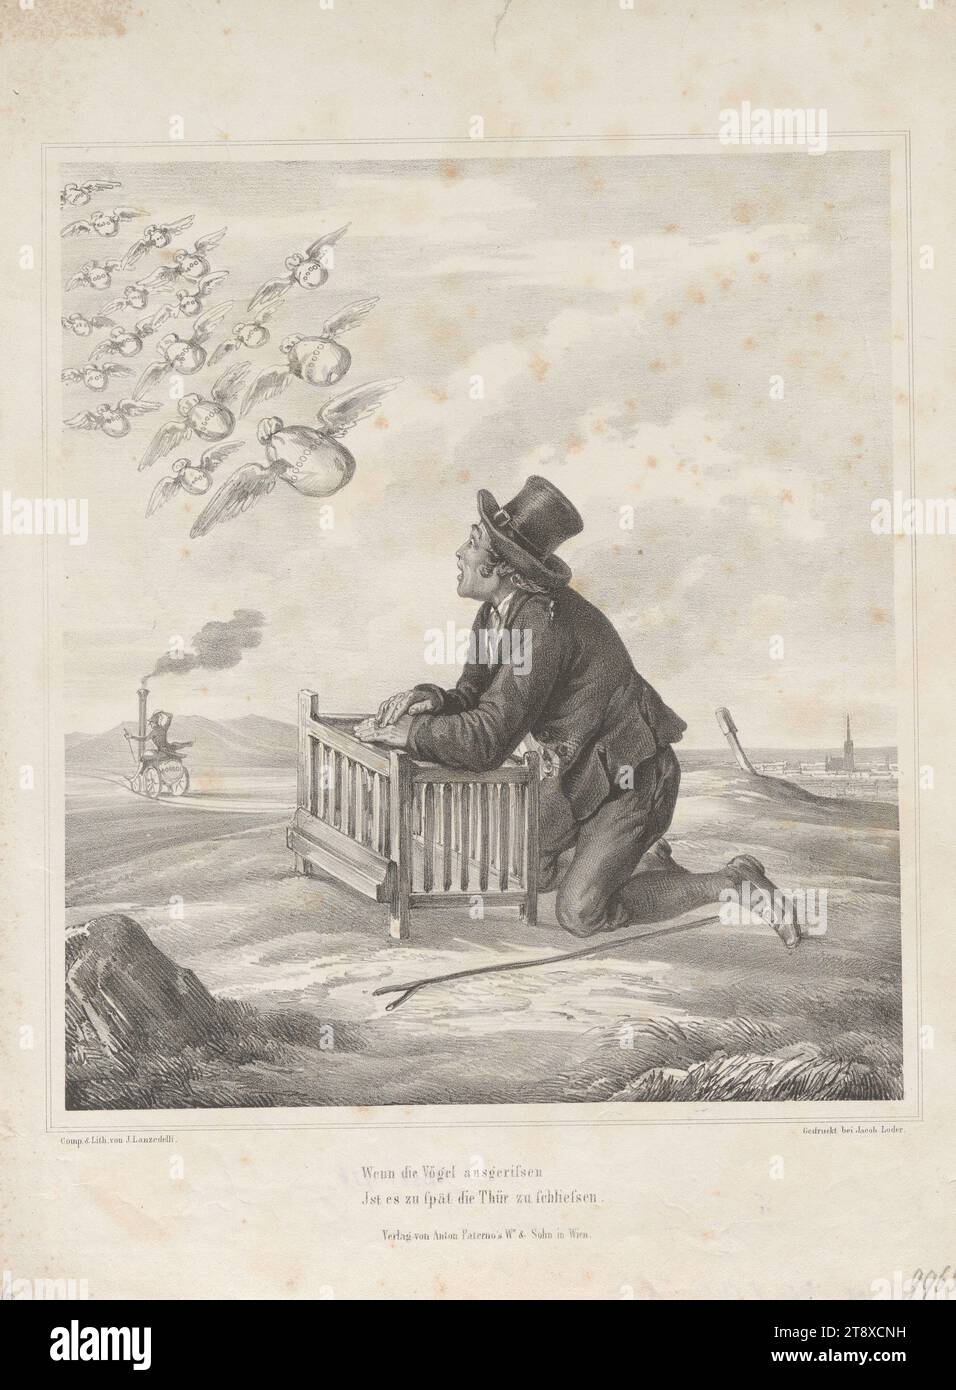 When the birds have fled, It's too late to close the door. (Satire on the flight of Metternich in March 1848), Josef the Younger Lanzedelly (Lanzedelli; Lancedelli) (1807-1879), lithographer, Jakob Loder, printer, 1848, paper, chalk lithograph, height 36 cm, width 26.9 cm, revolutions of 1848, 1849, caricature, satire, flight, politics, pre-March, Biedermeier, flight, running away; persecution, politicians, The Vienna Collection Stock Photo